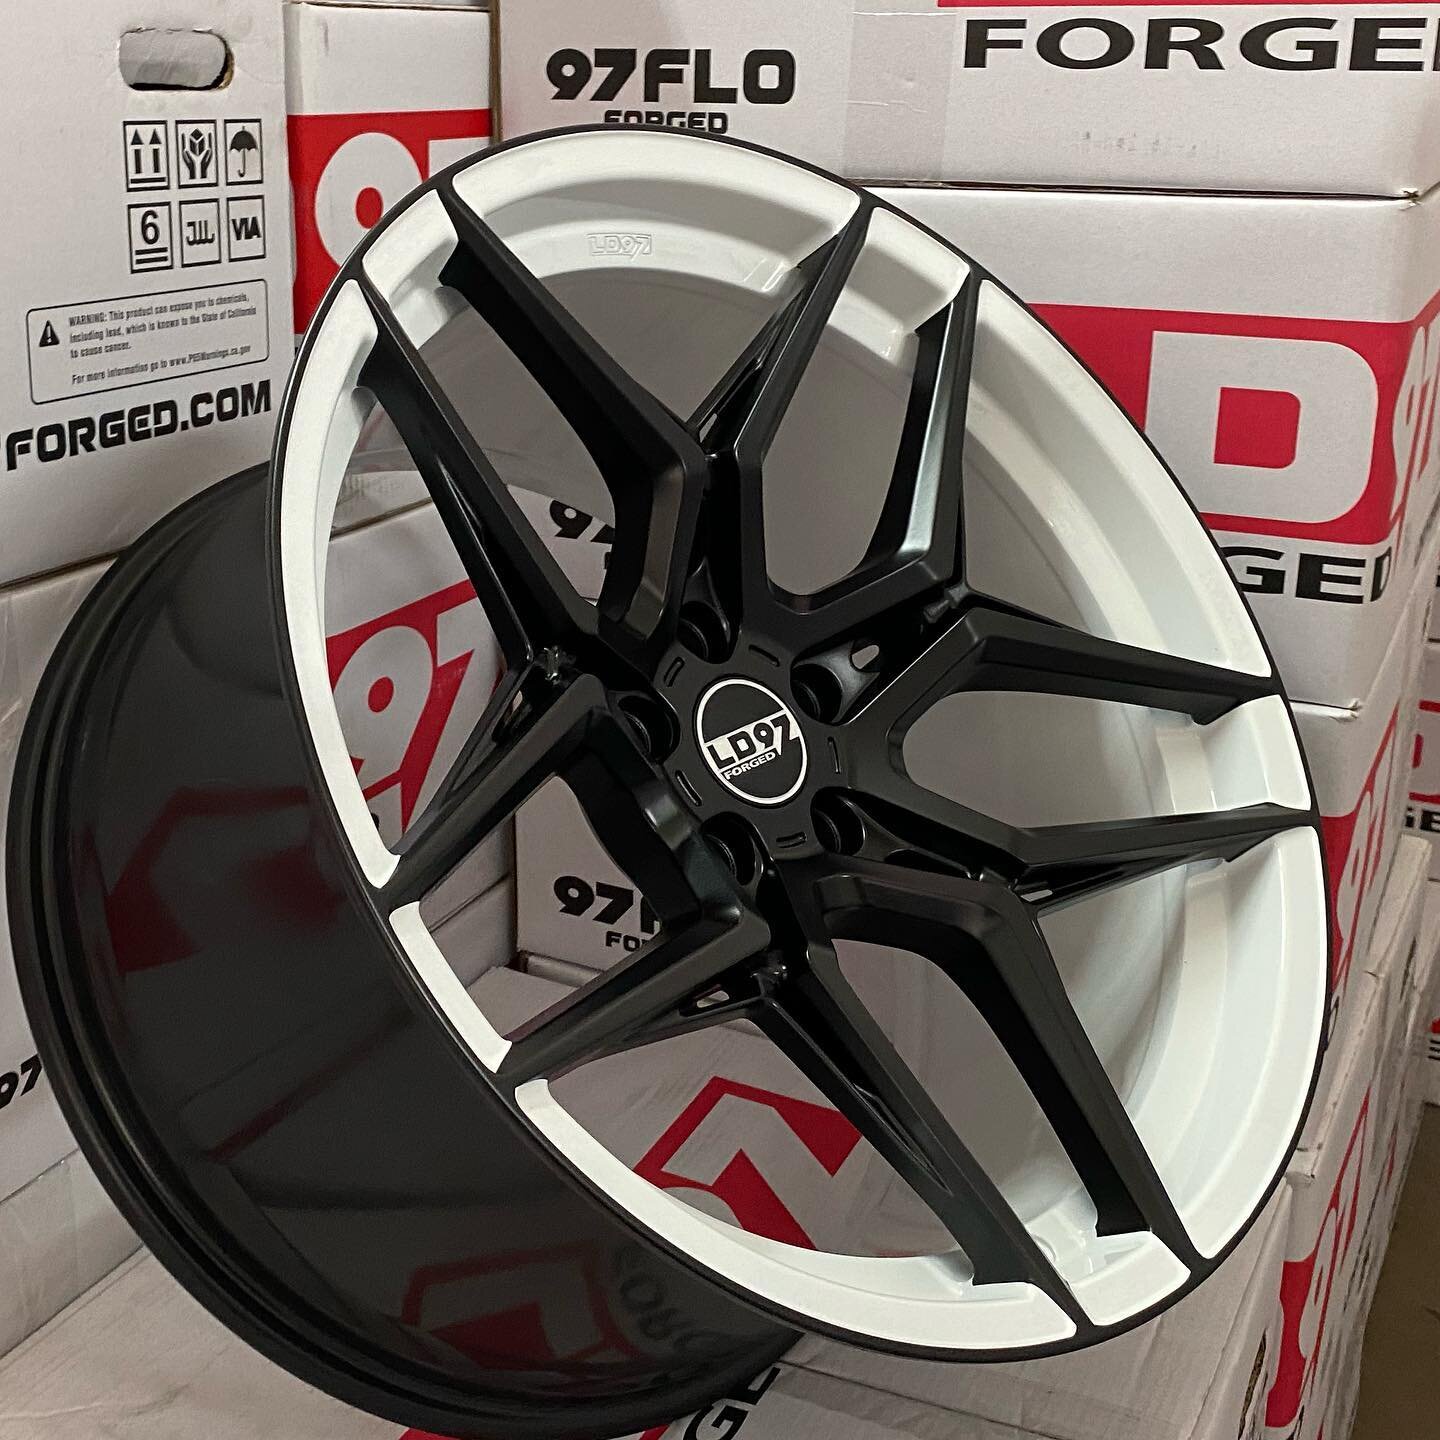 LDF02!!!
Custom satin black face and white. 
97flo forged wheel.
Starting 19&rdquo; $1,599.00 20&rdquo; $1999.00 for Standard colors 
@2020_scat_project 

Now available in 19&rdquo; and 20&rdquo; fitments. 
Custom 20x11 &amp; 20x12 negative offsets t